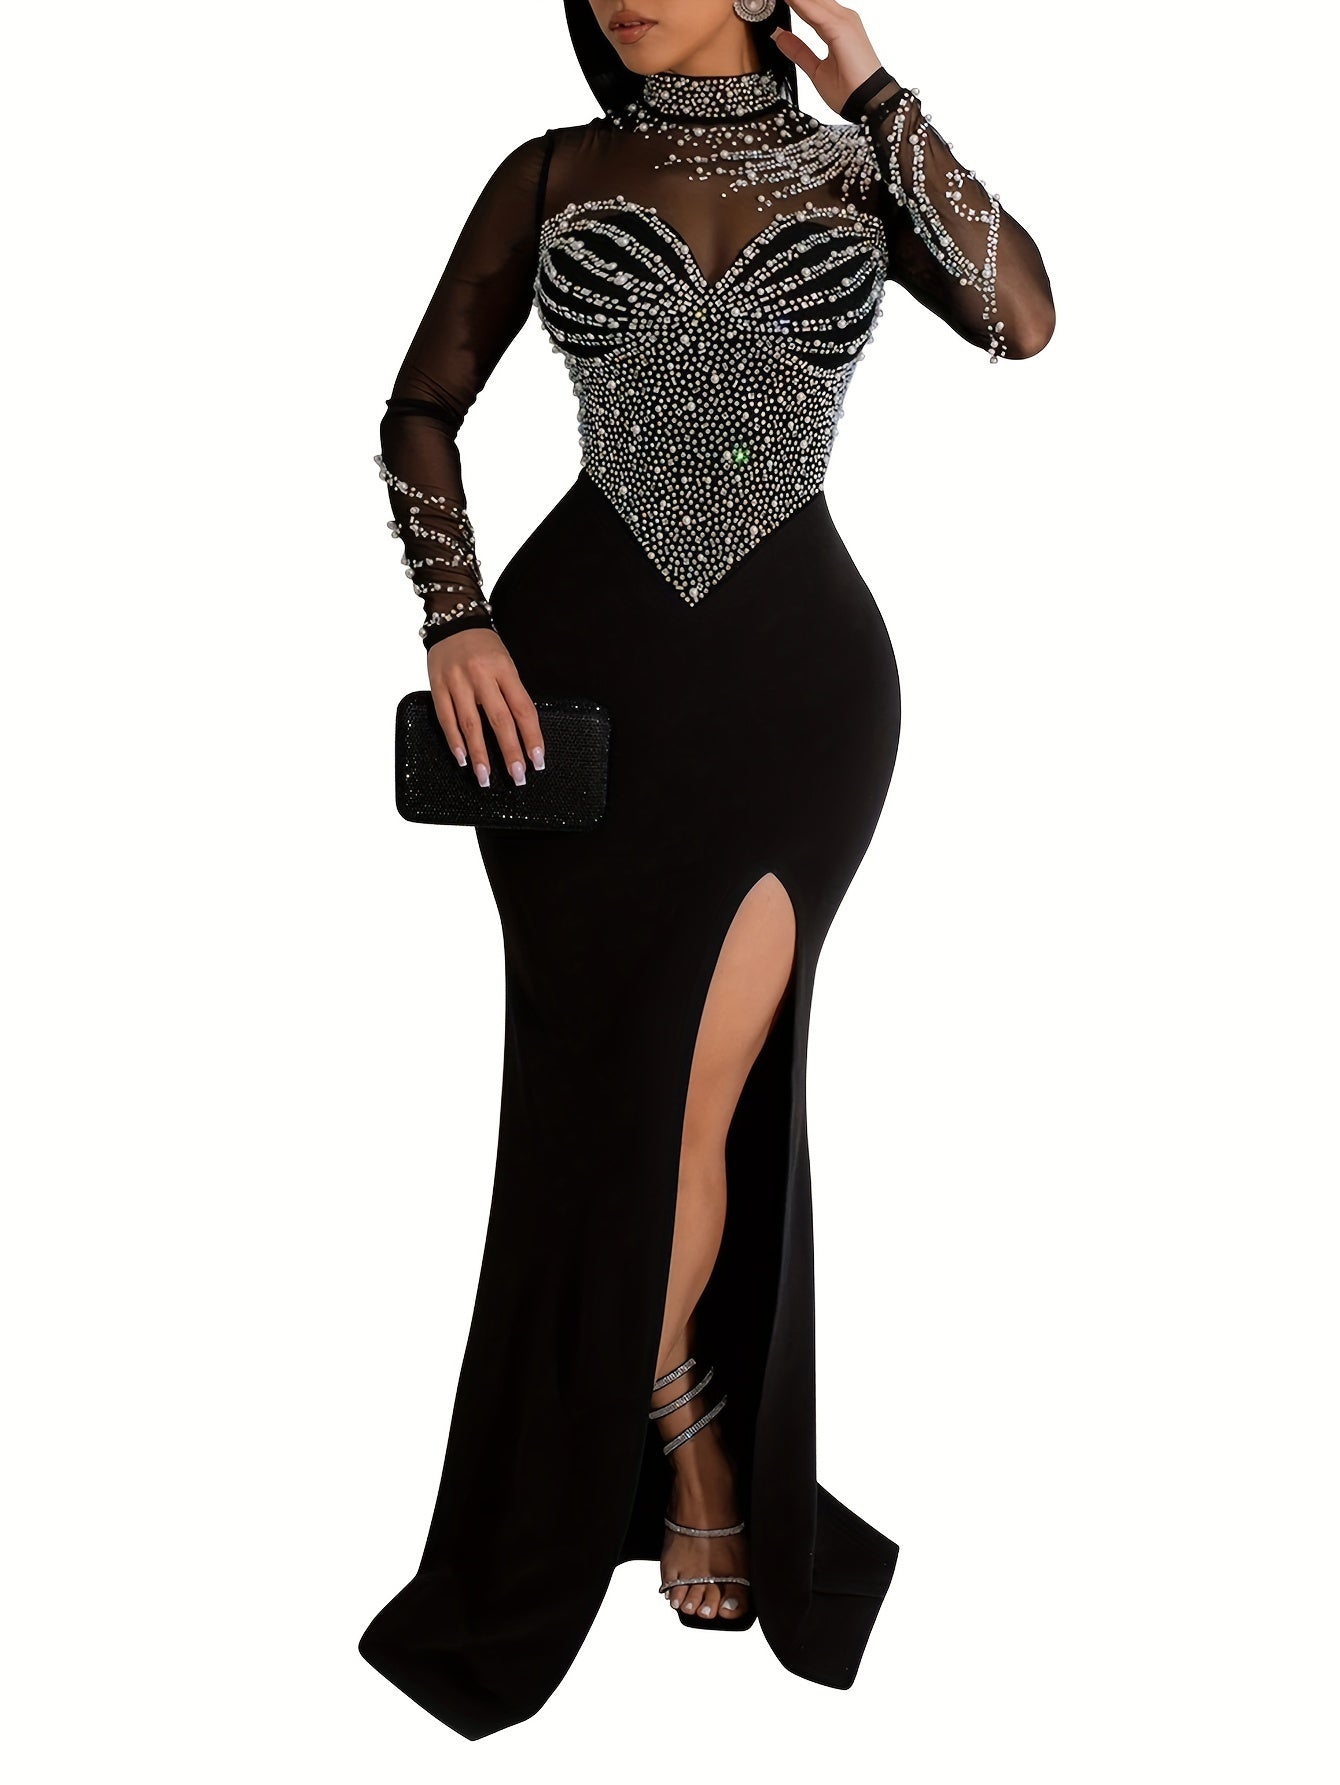 VAKKV Long Sleeve Rhinestone Bodycon Dress - Dazzling Embellishments, Flattering Mock Slit, Elegant Mesh Splicing - Perfect for Womens Formal Events, Parties, and Banquets